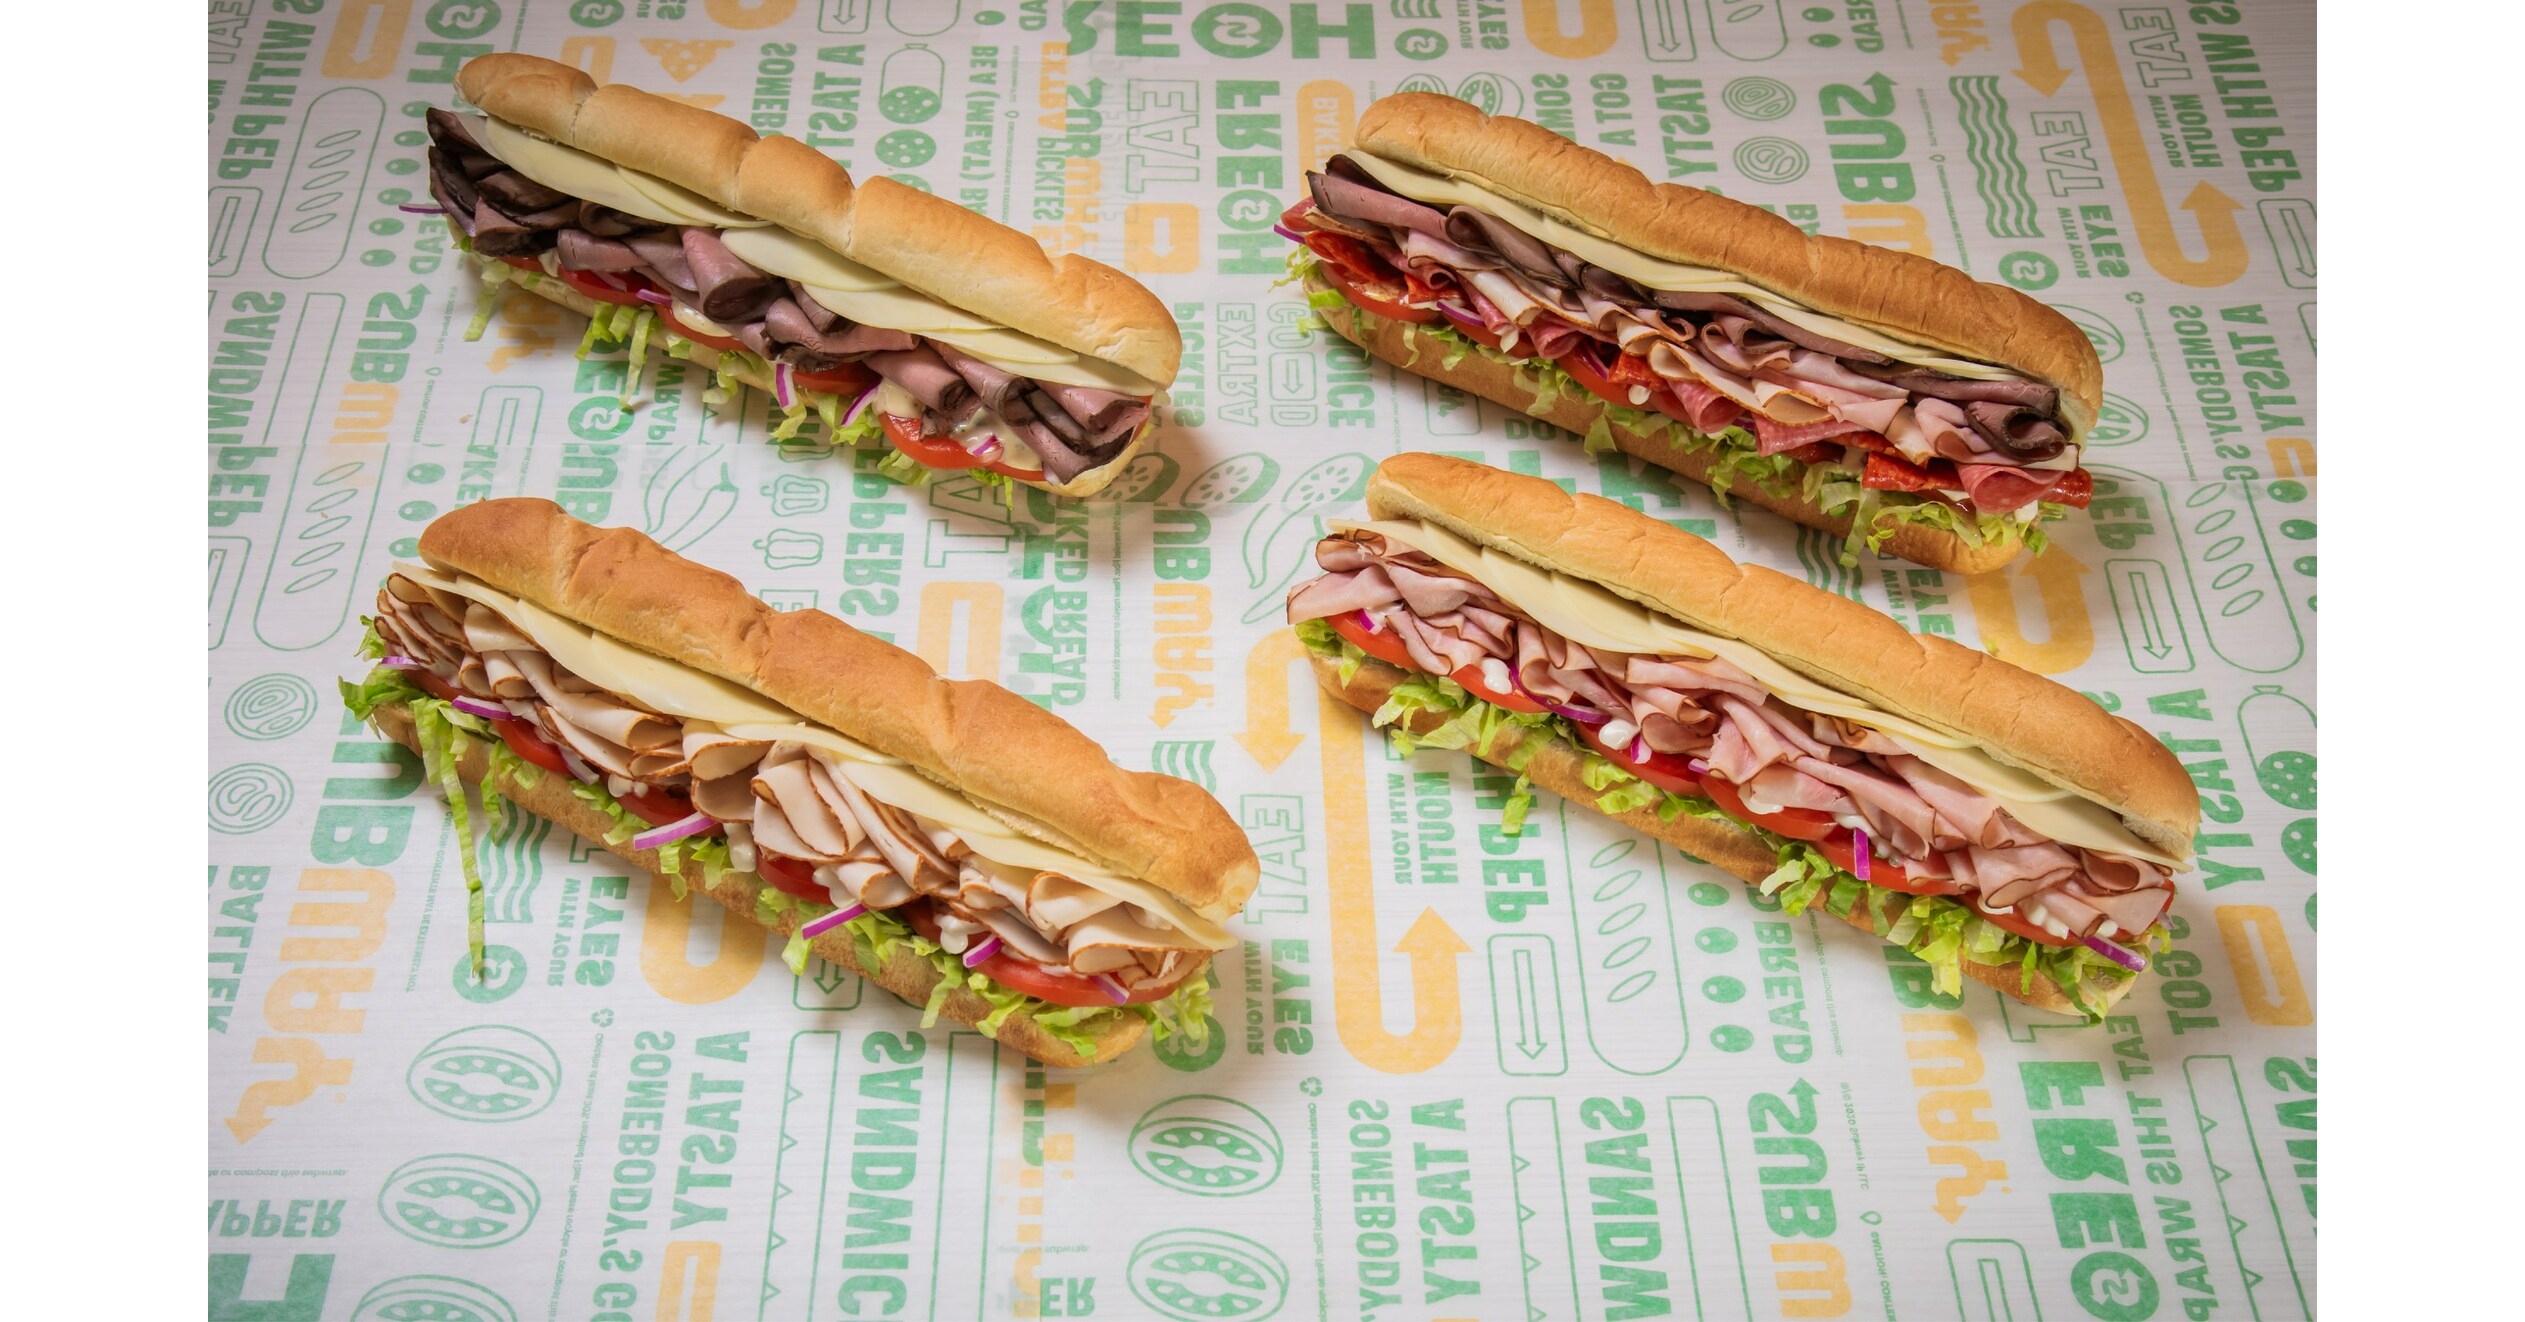 Subway grasps for lifeline with new menu lineup including